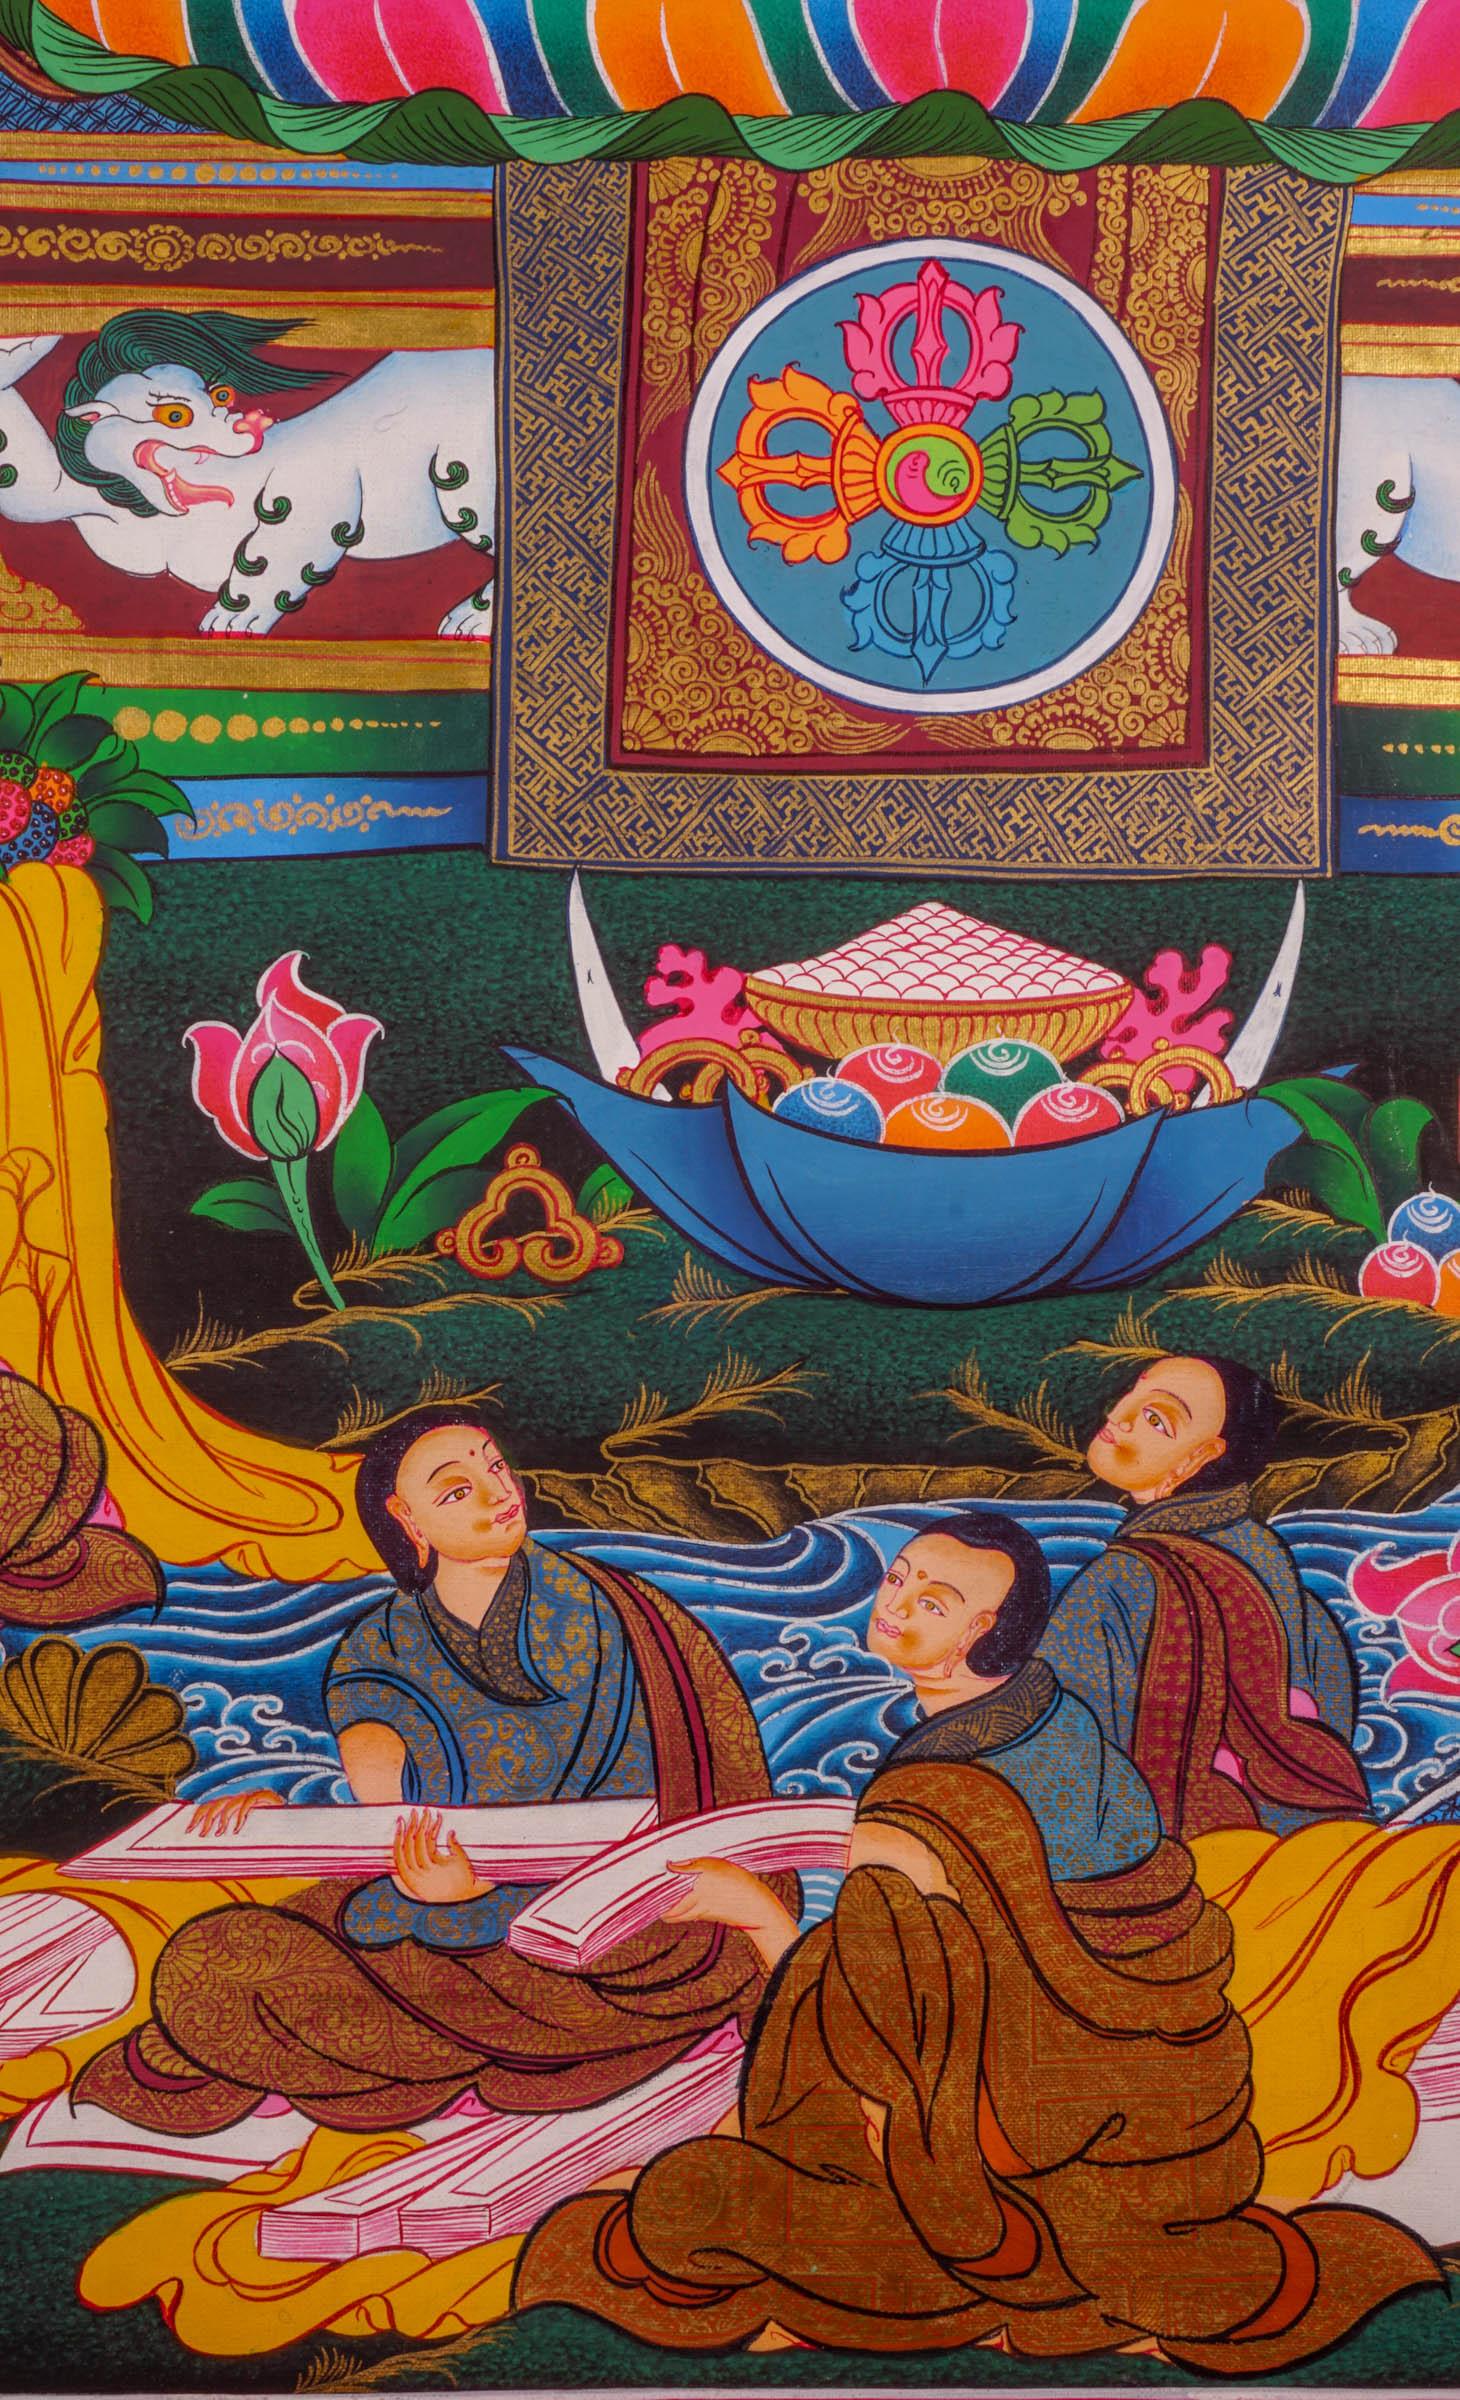 Chungapa Thangka painting on cotton canvas for wall hanging . This is a master piece art of Chungapa,